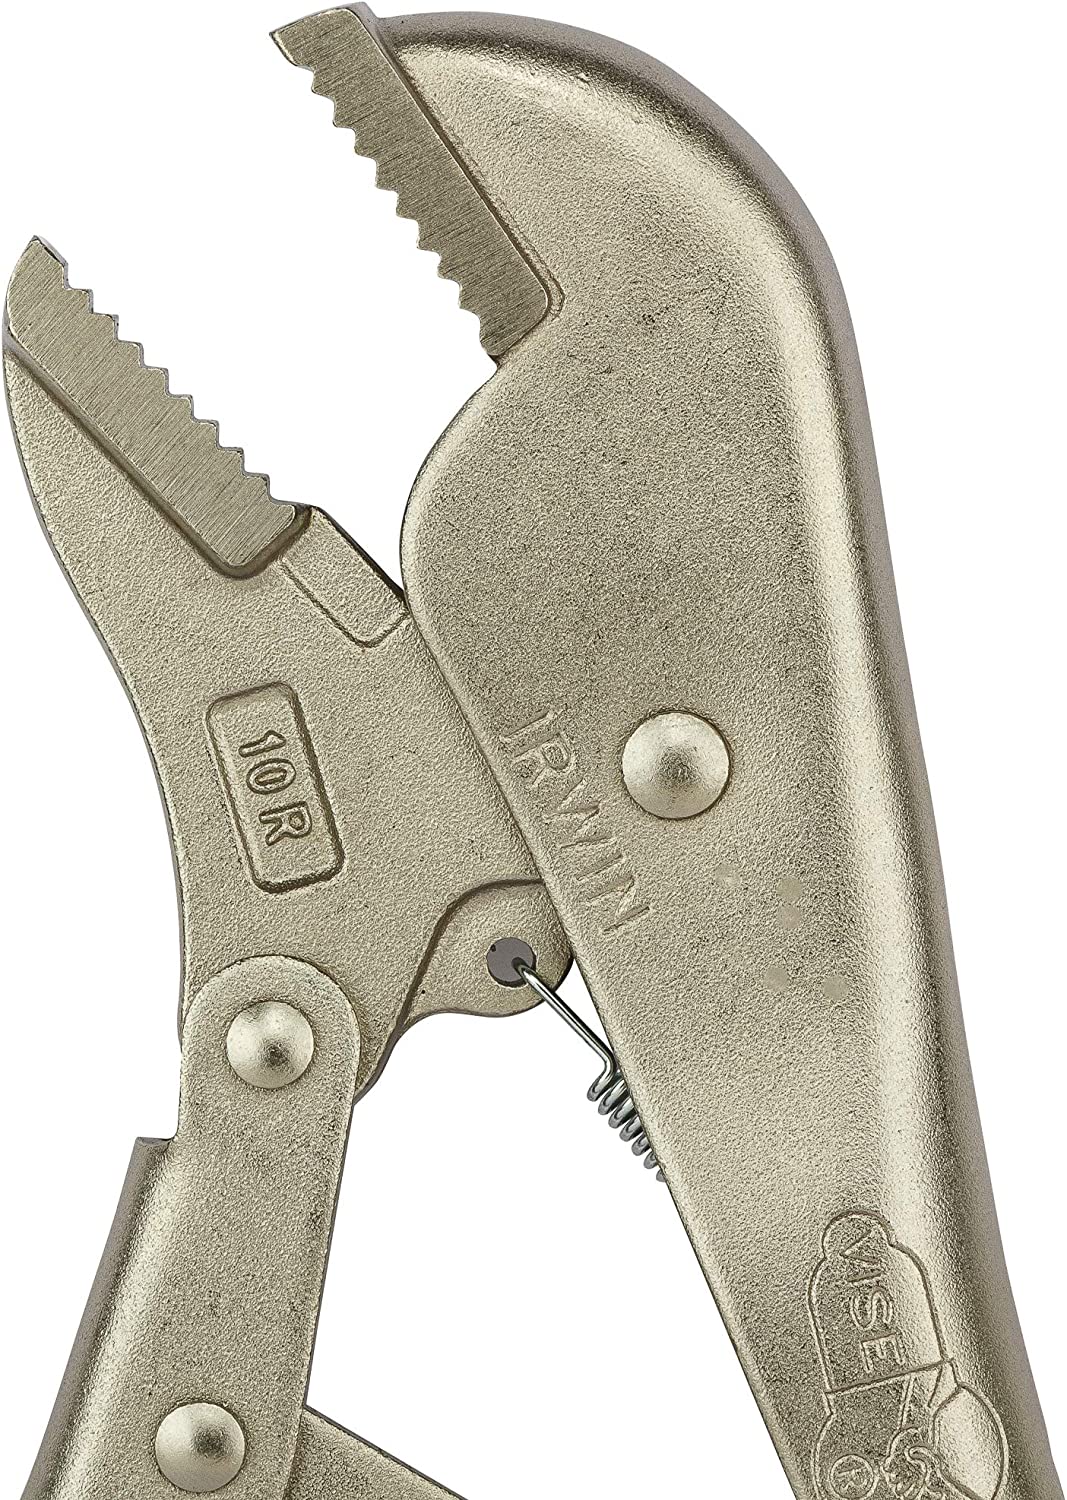 VISE-GRIP Fast Release 10R Straight Jaw Locking Pliers 10" 3